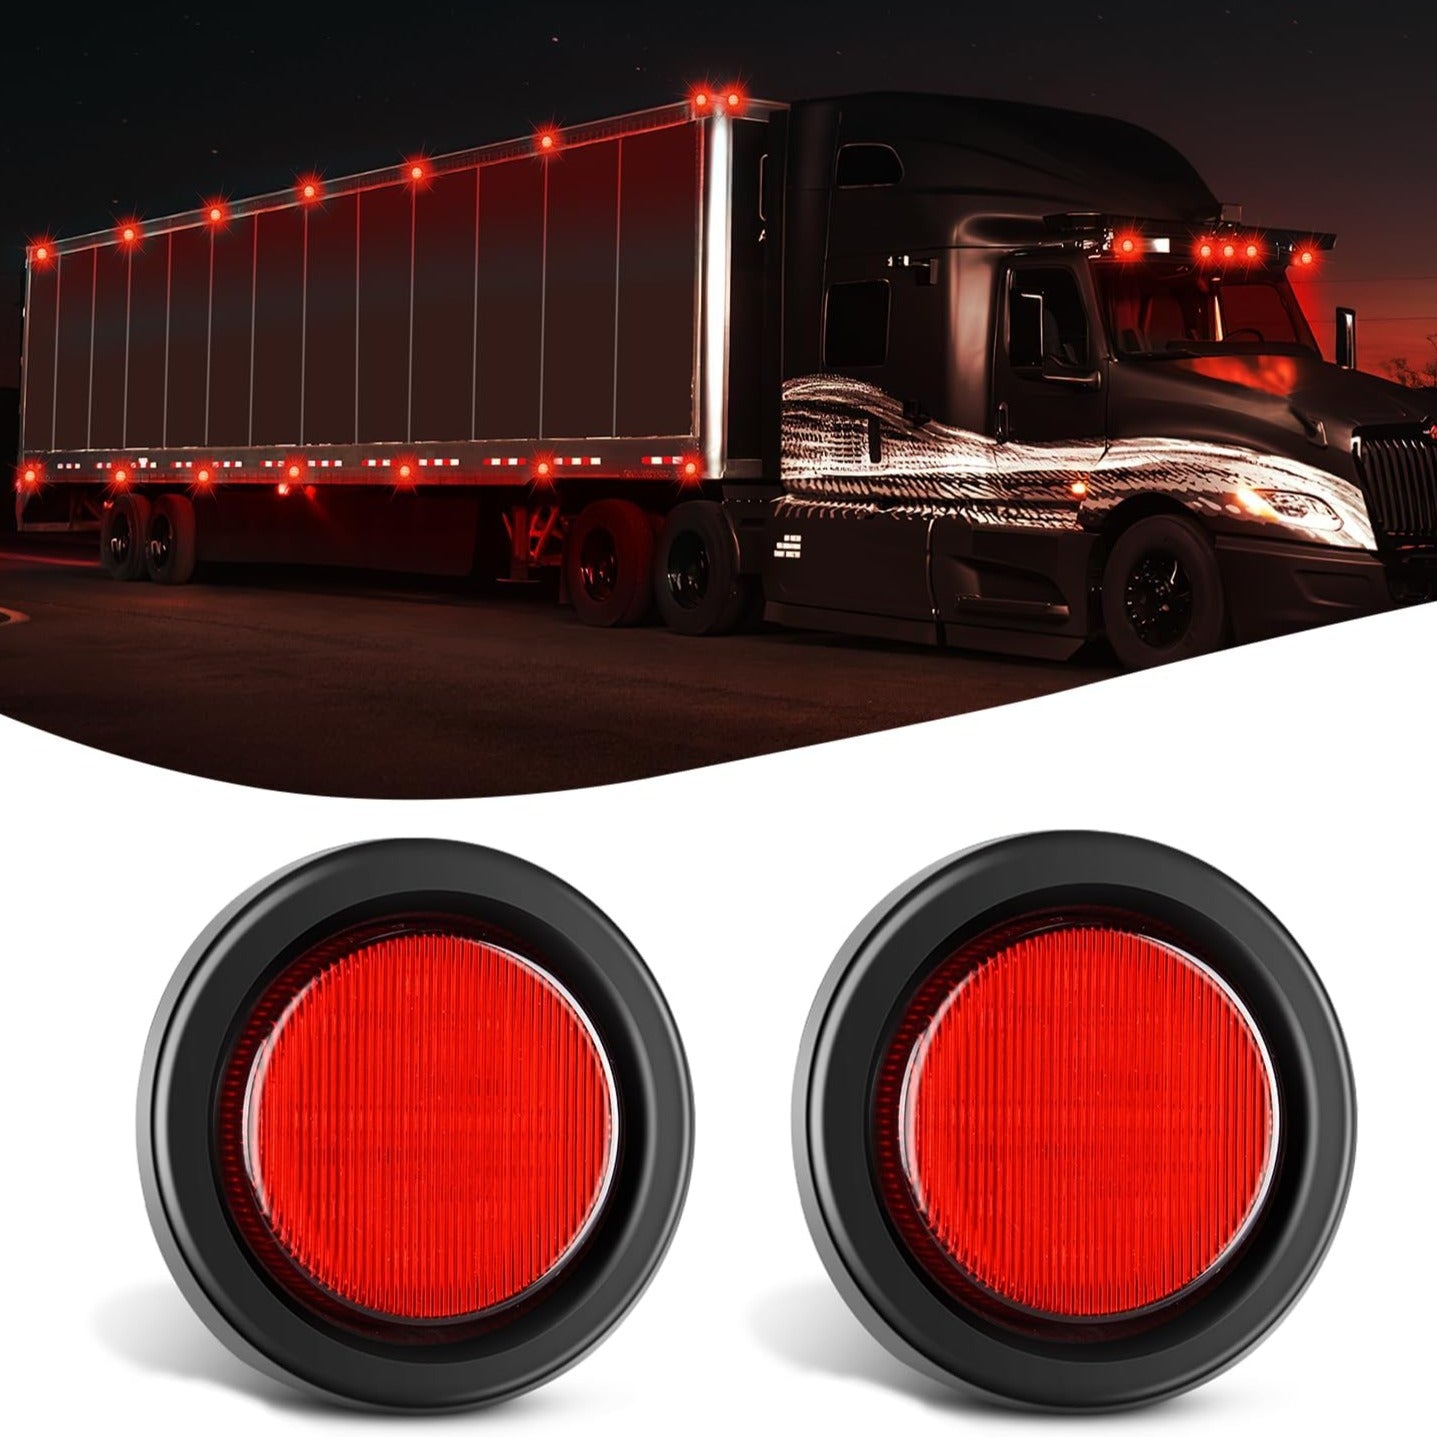 2.5" Red 13 Leds Round Marker Clearance Light (Pair) Nilight